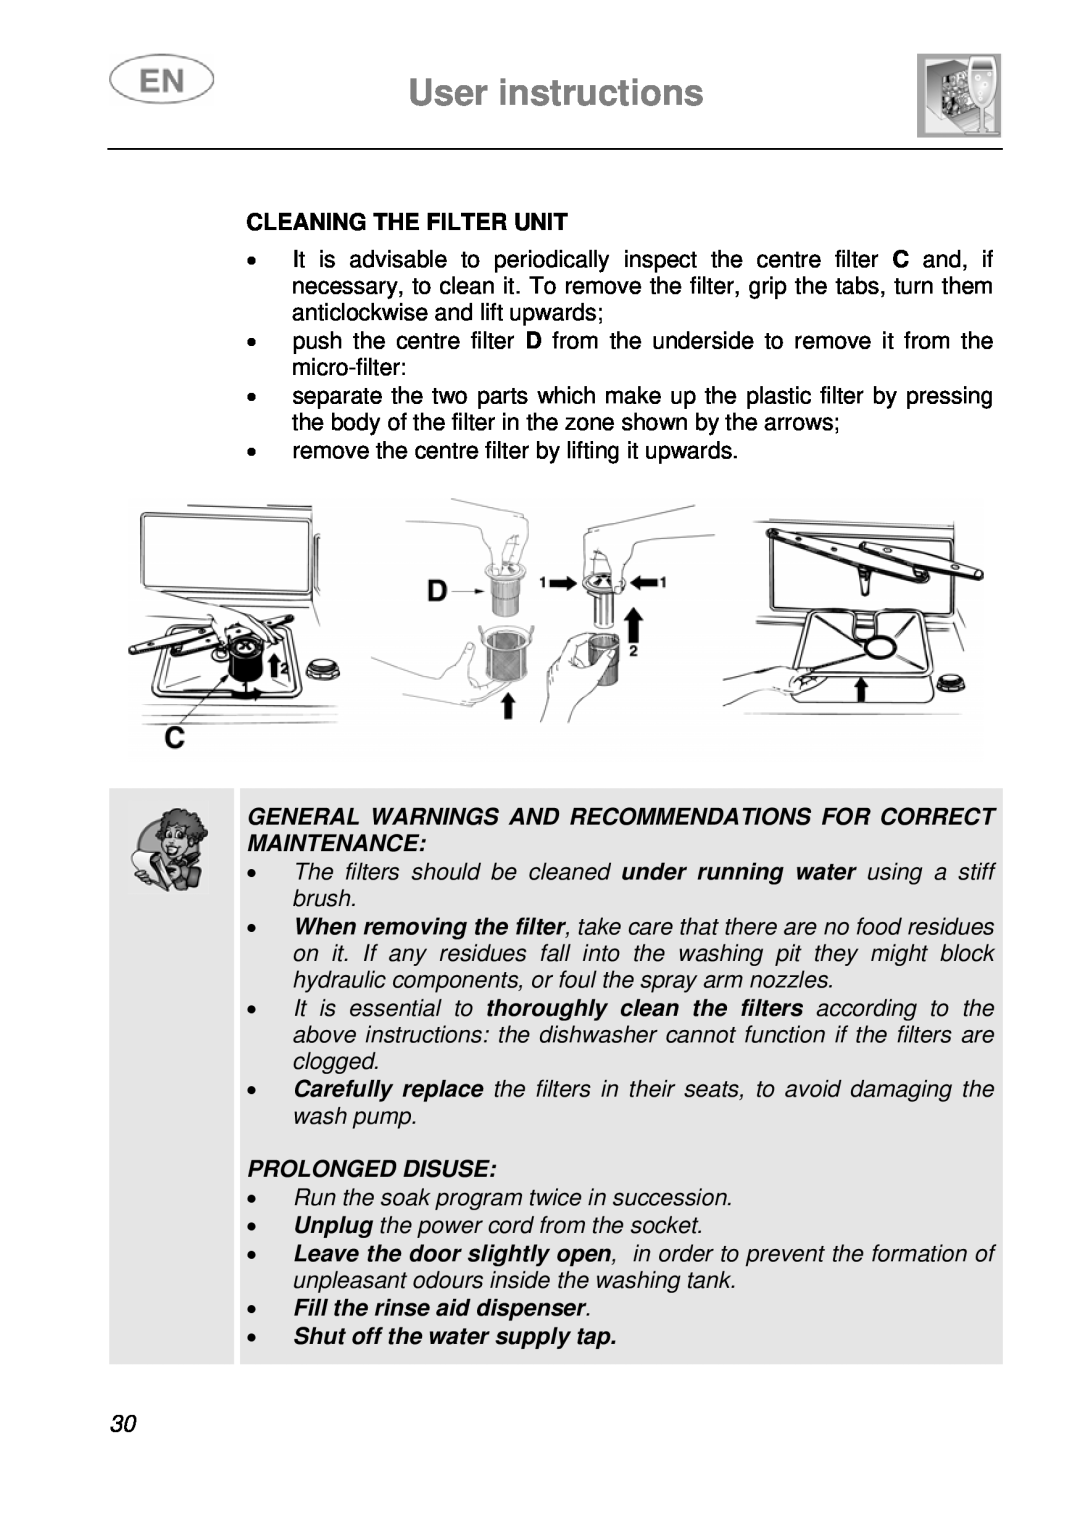 Smeg DI612A1 User instructions, Cleaning The Filter Unit, General Warnings And Recommendations For Correct Maintenance 